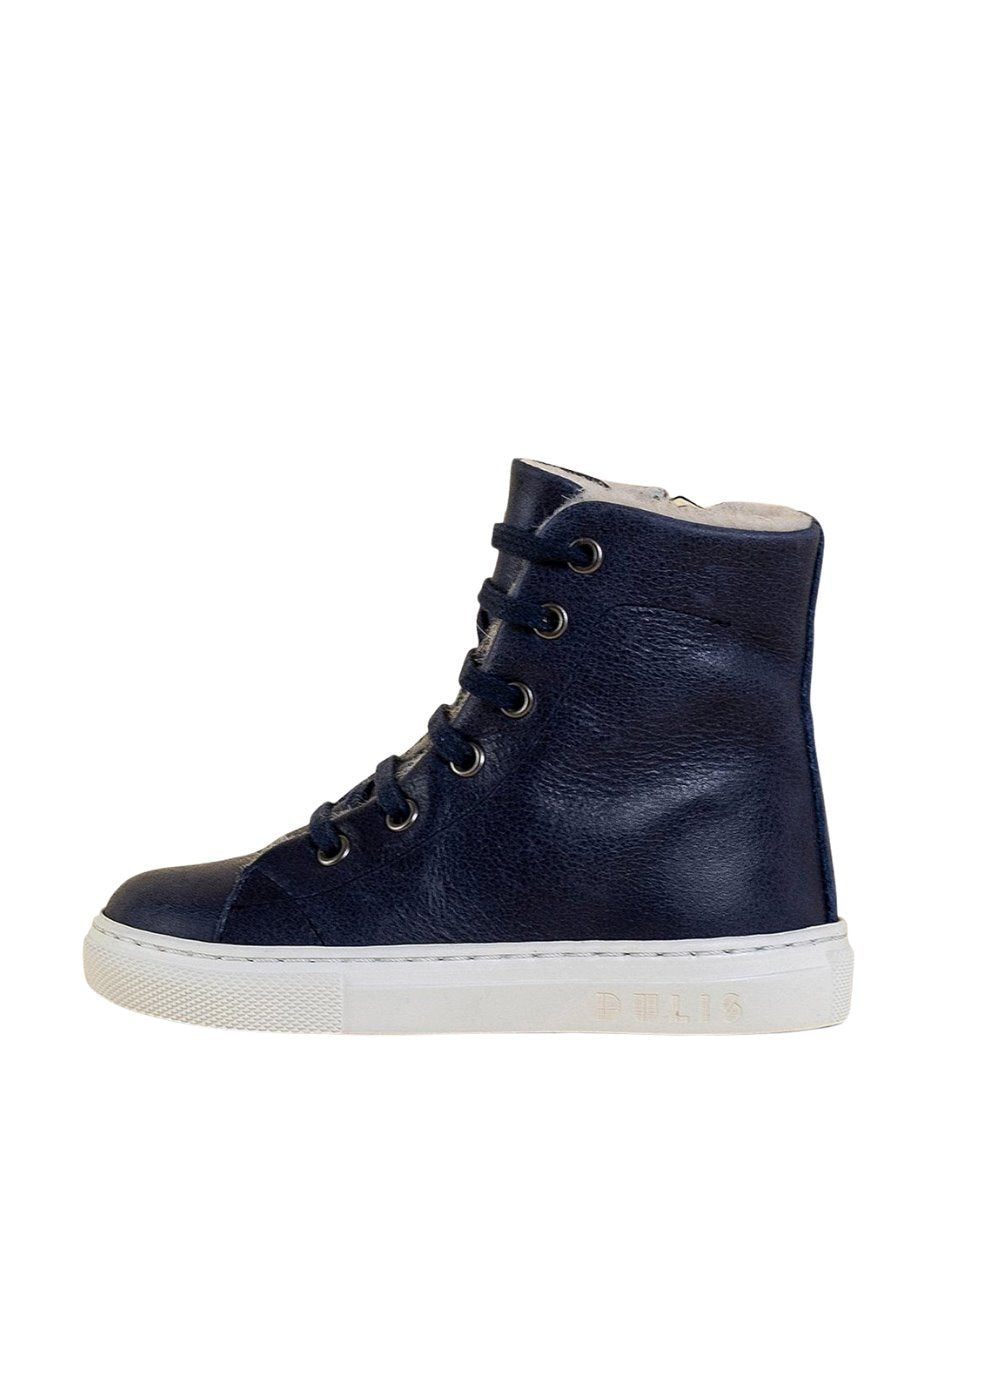 Navy High Top Sneakers Shoes Dulis Shoes 